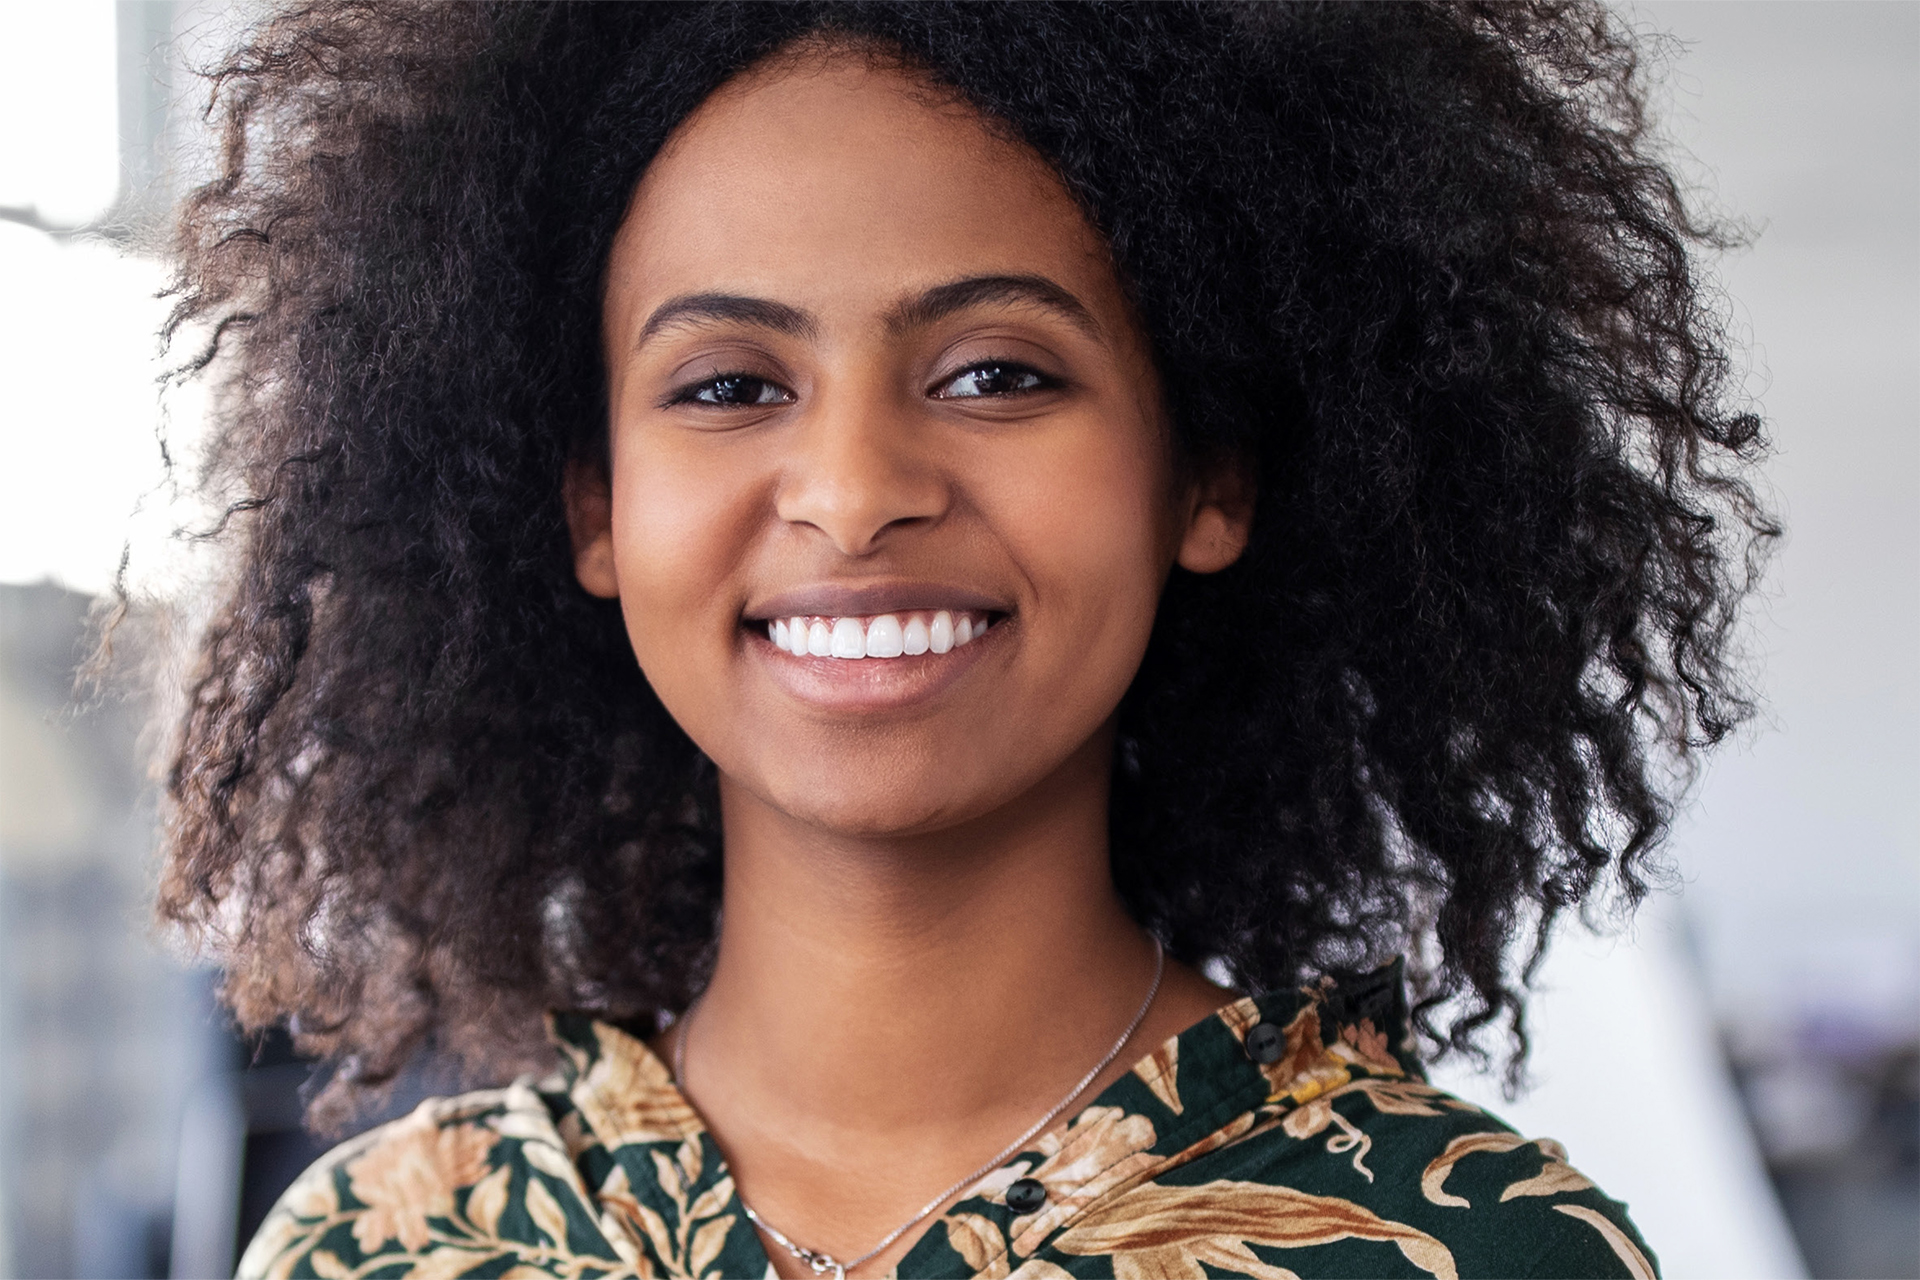 Woman Afro smiling